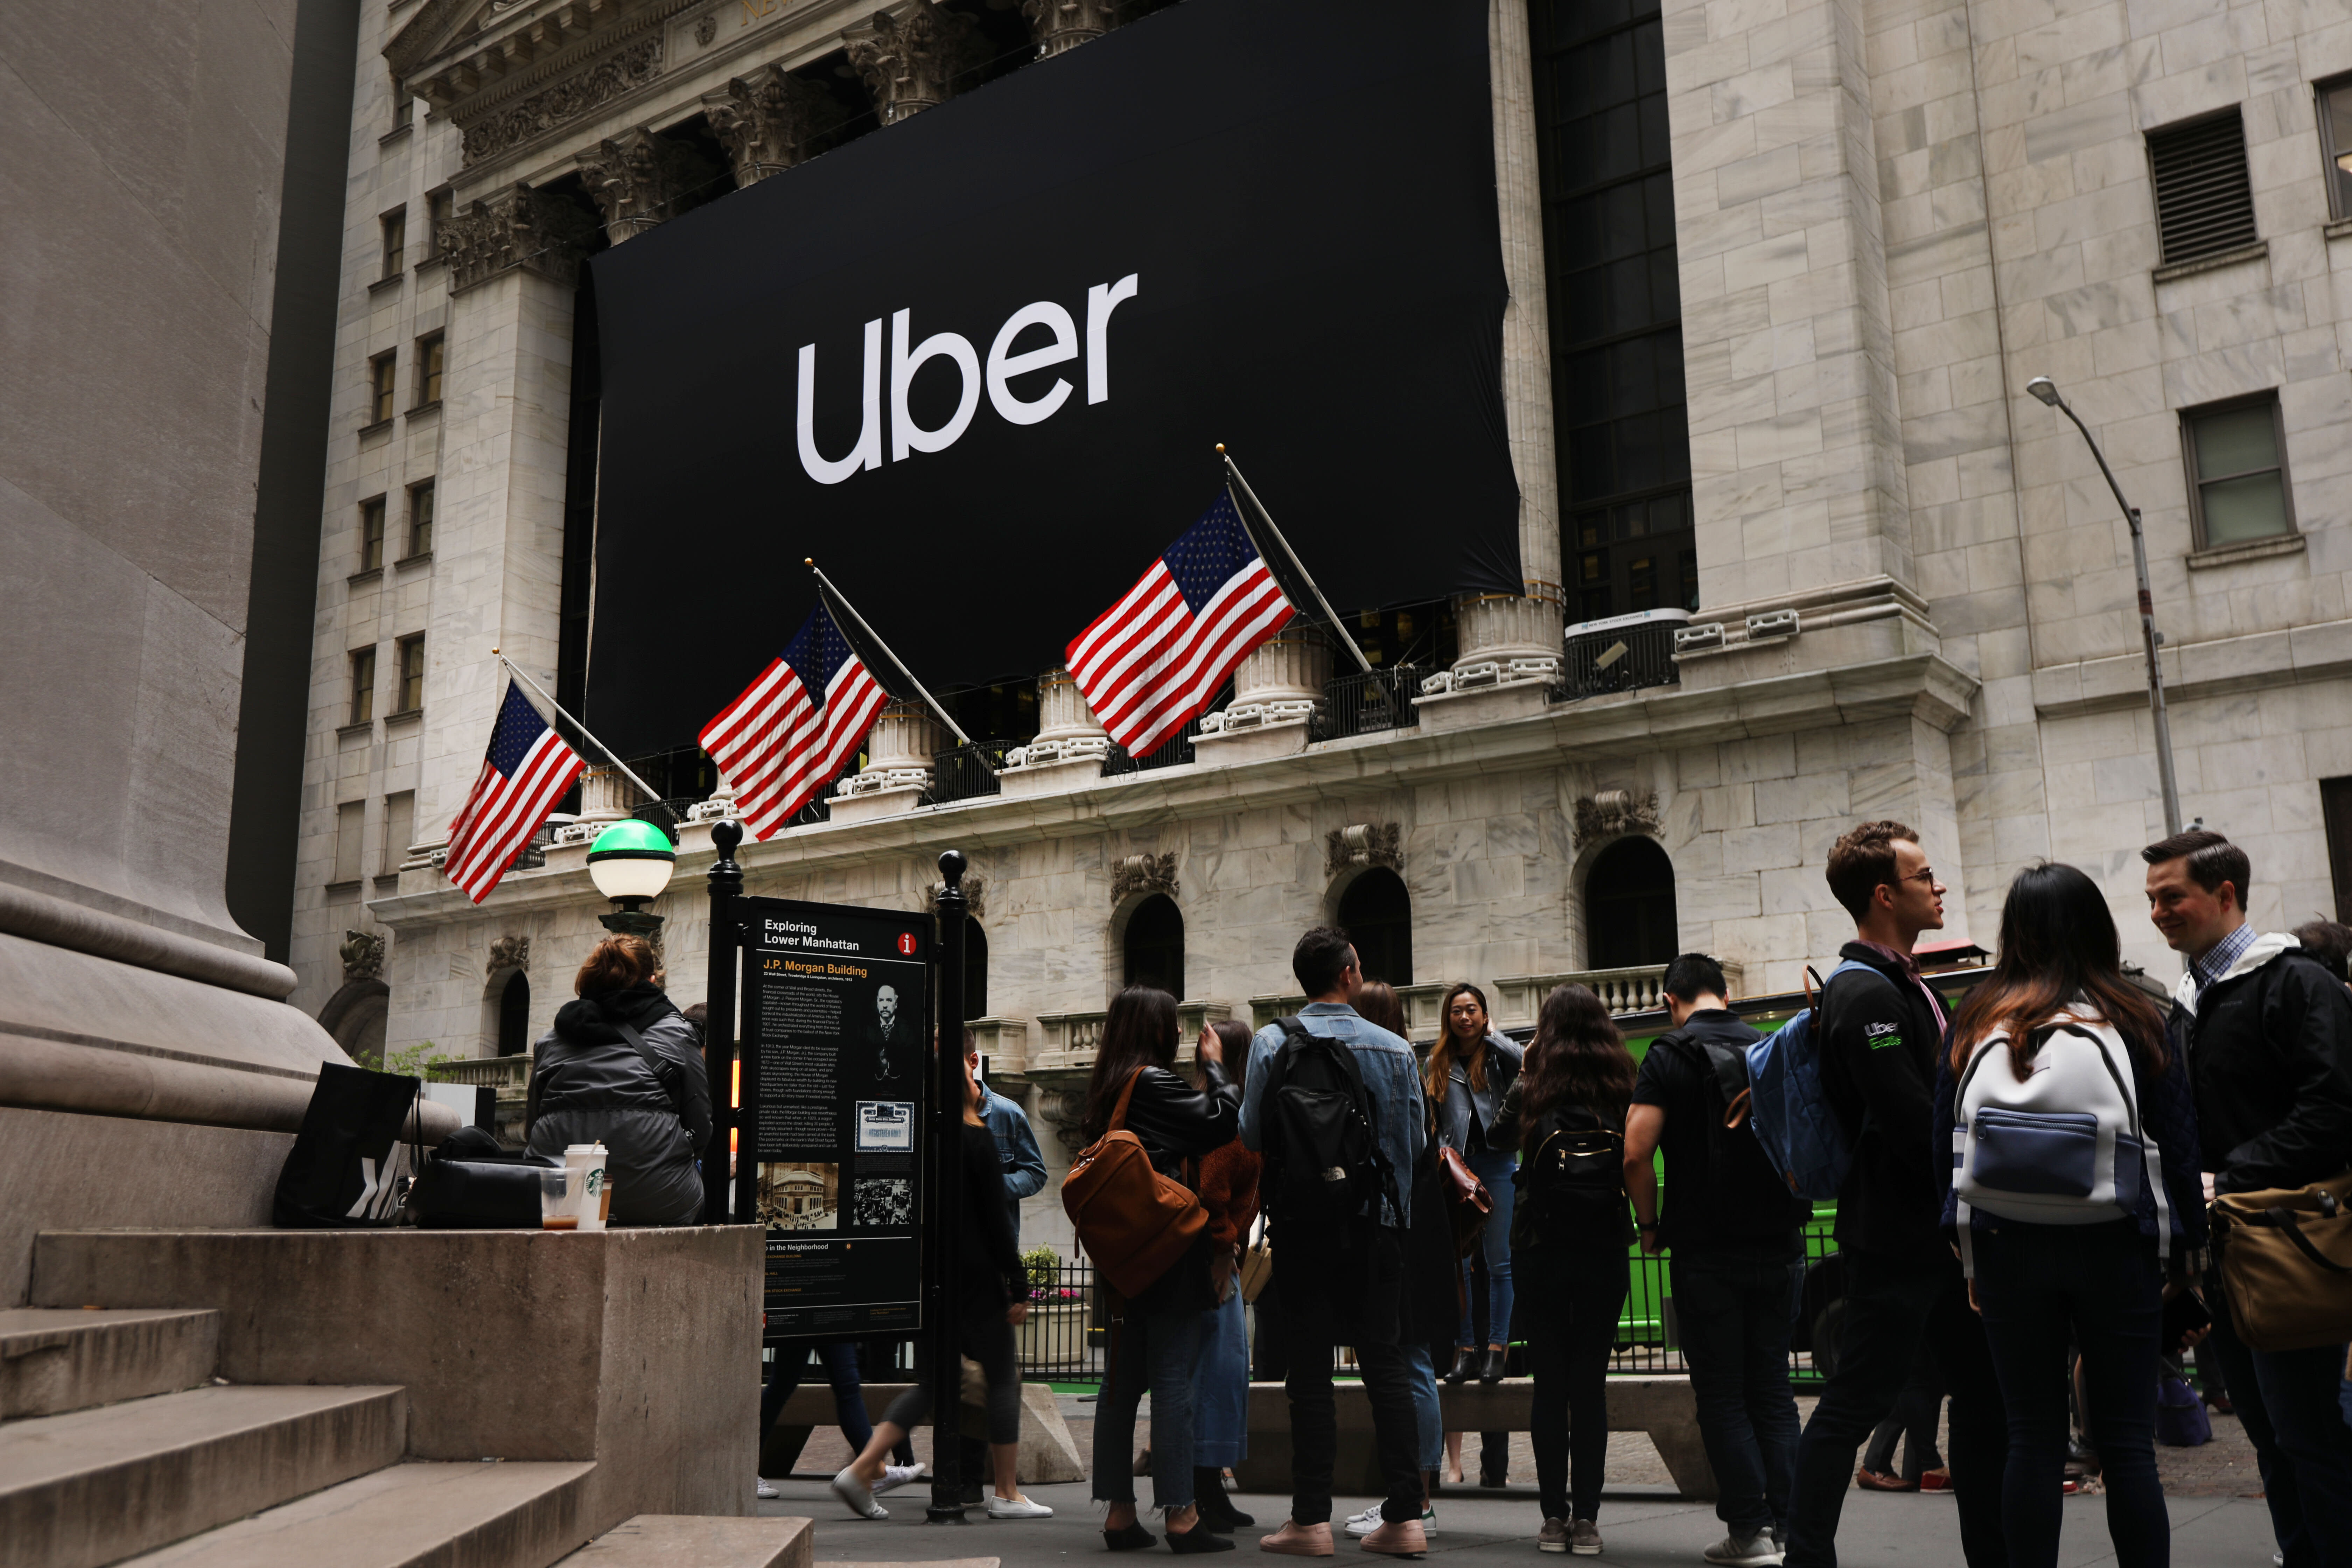 Here’s what Wall Street analysts are saying about Uber